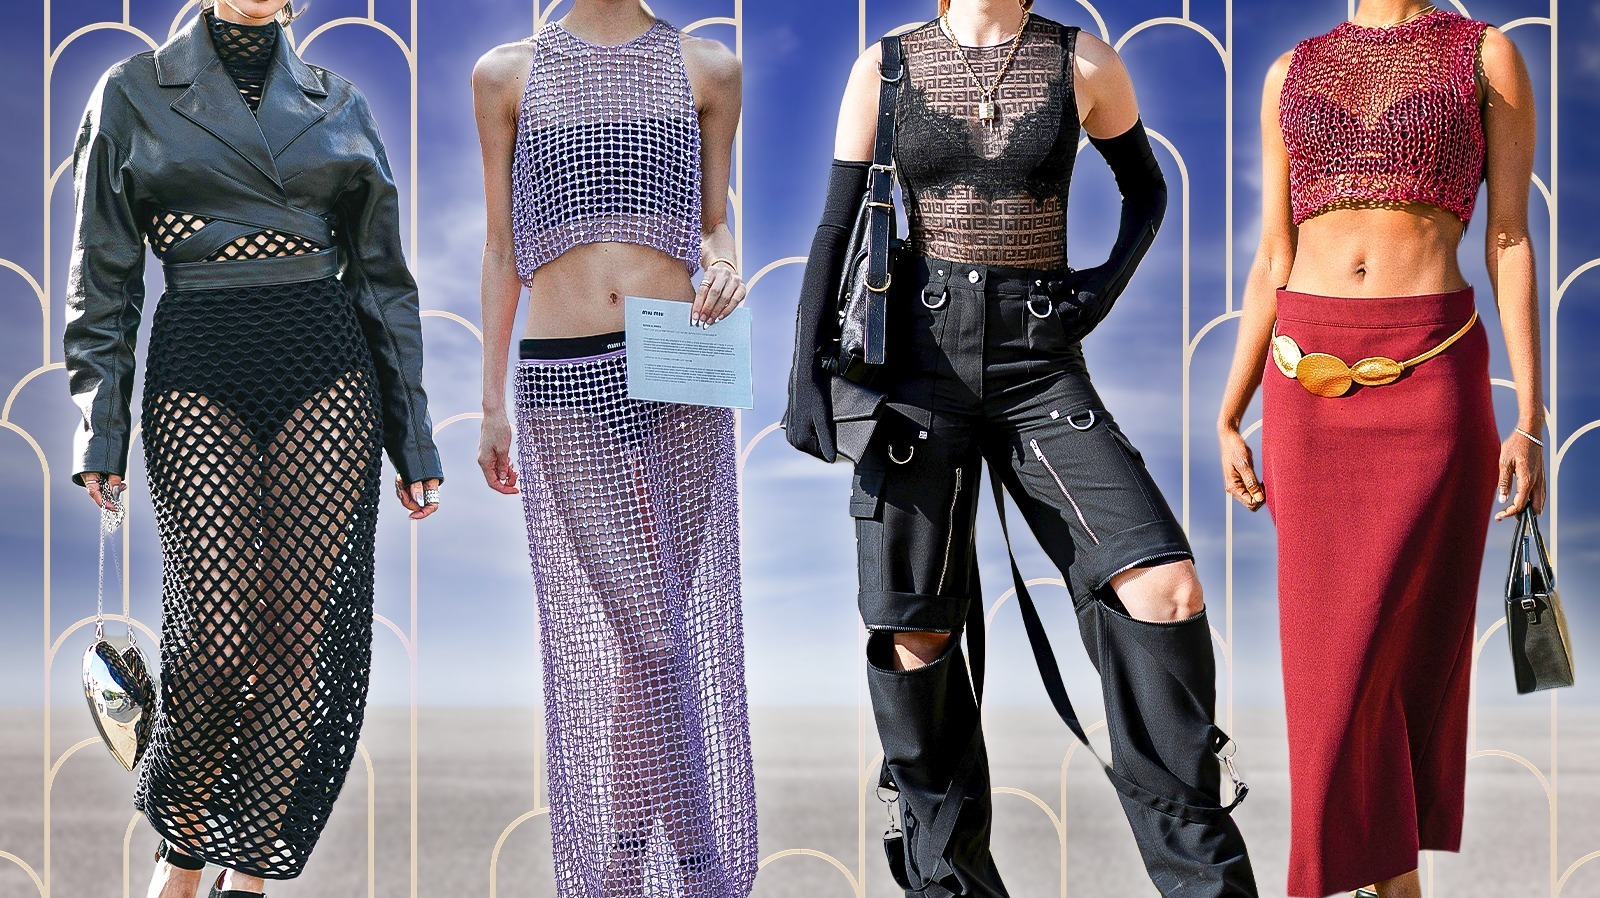 https://www.glam.com/img/gallery/mesh-is-the-new-sheer-for-2024-trends-our-tips-to-wear-it-right/l-intro-1699380861.jpg